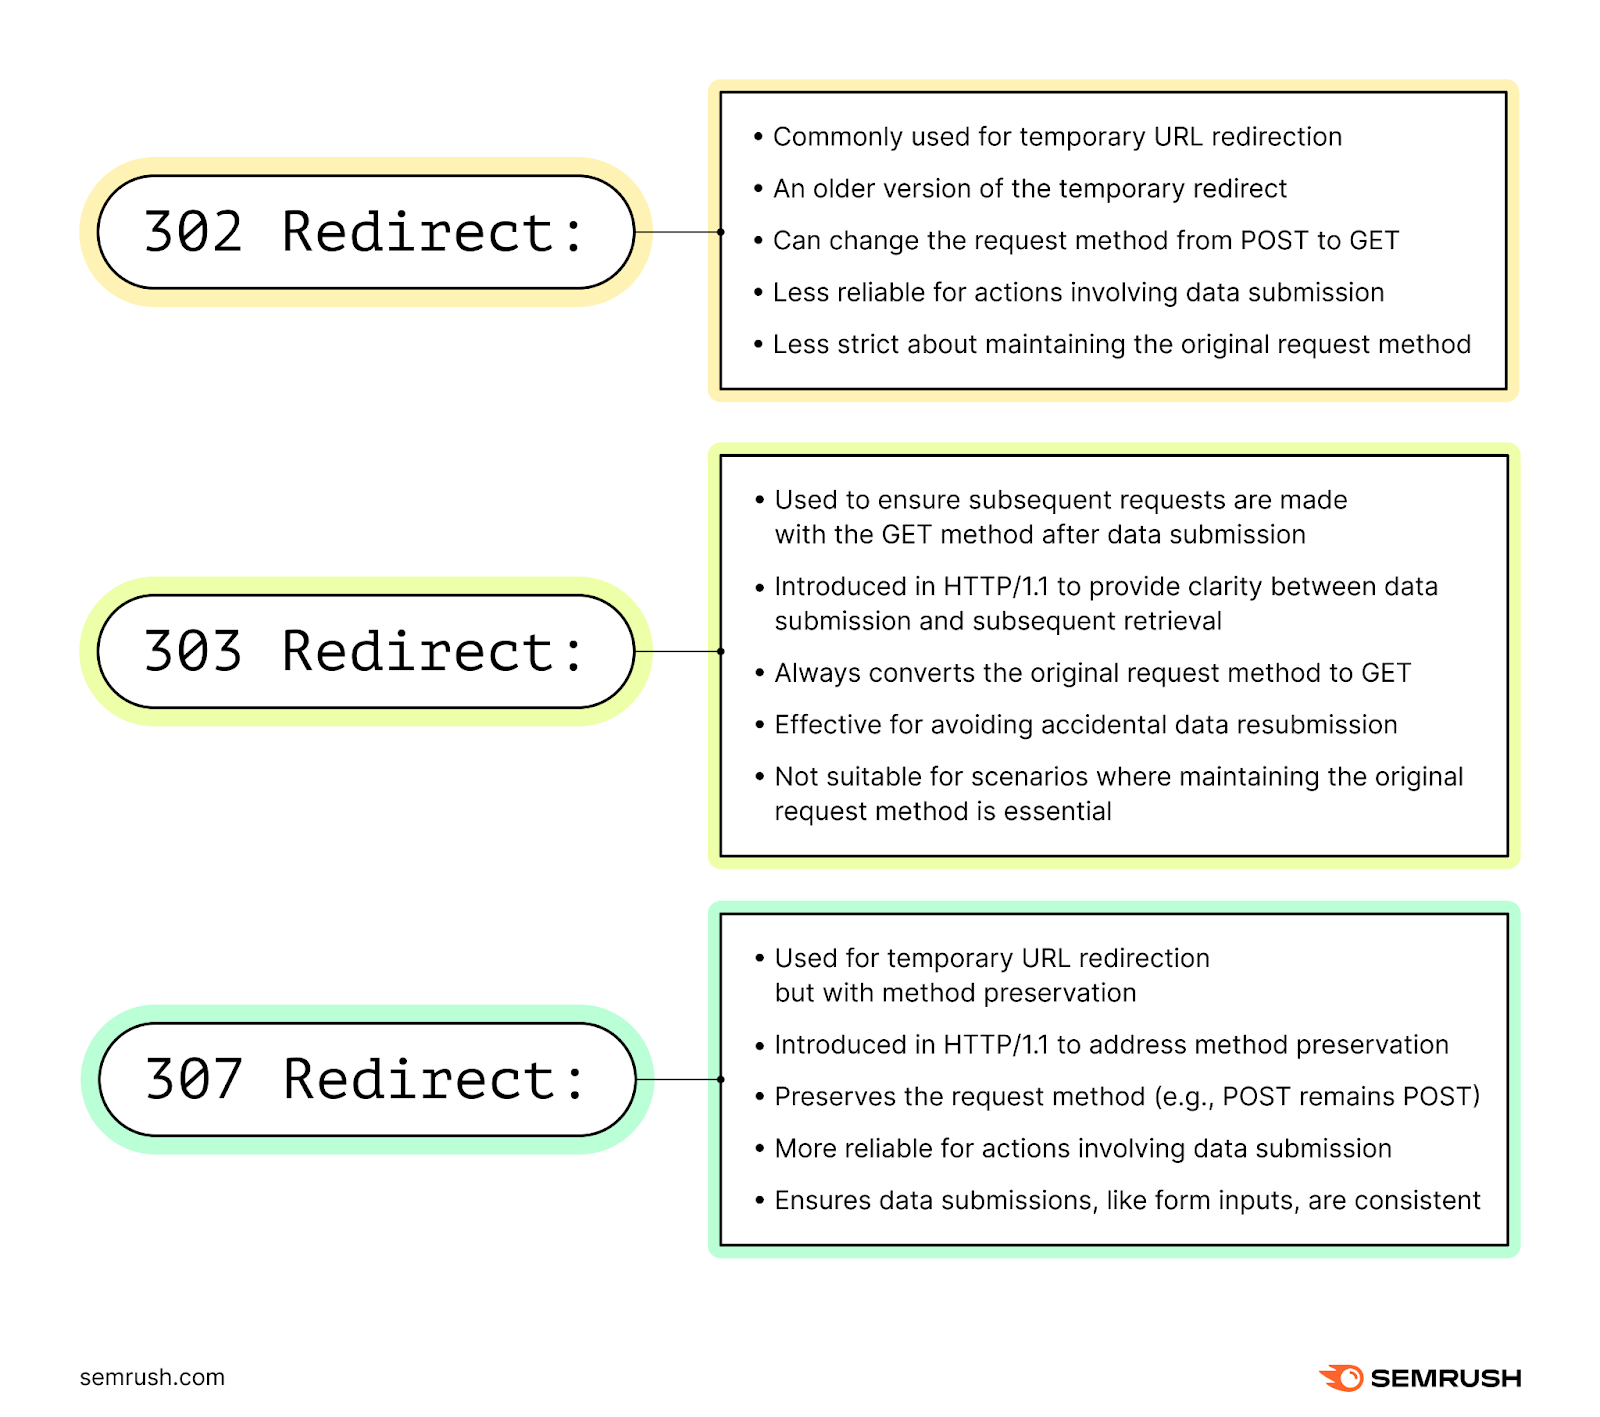 302, 303 and 307 redirects explained